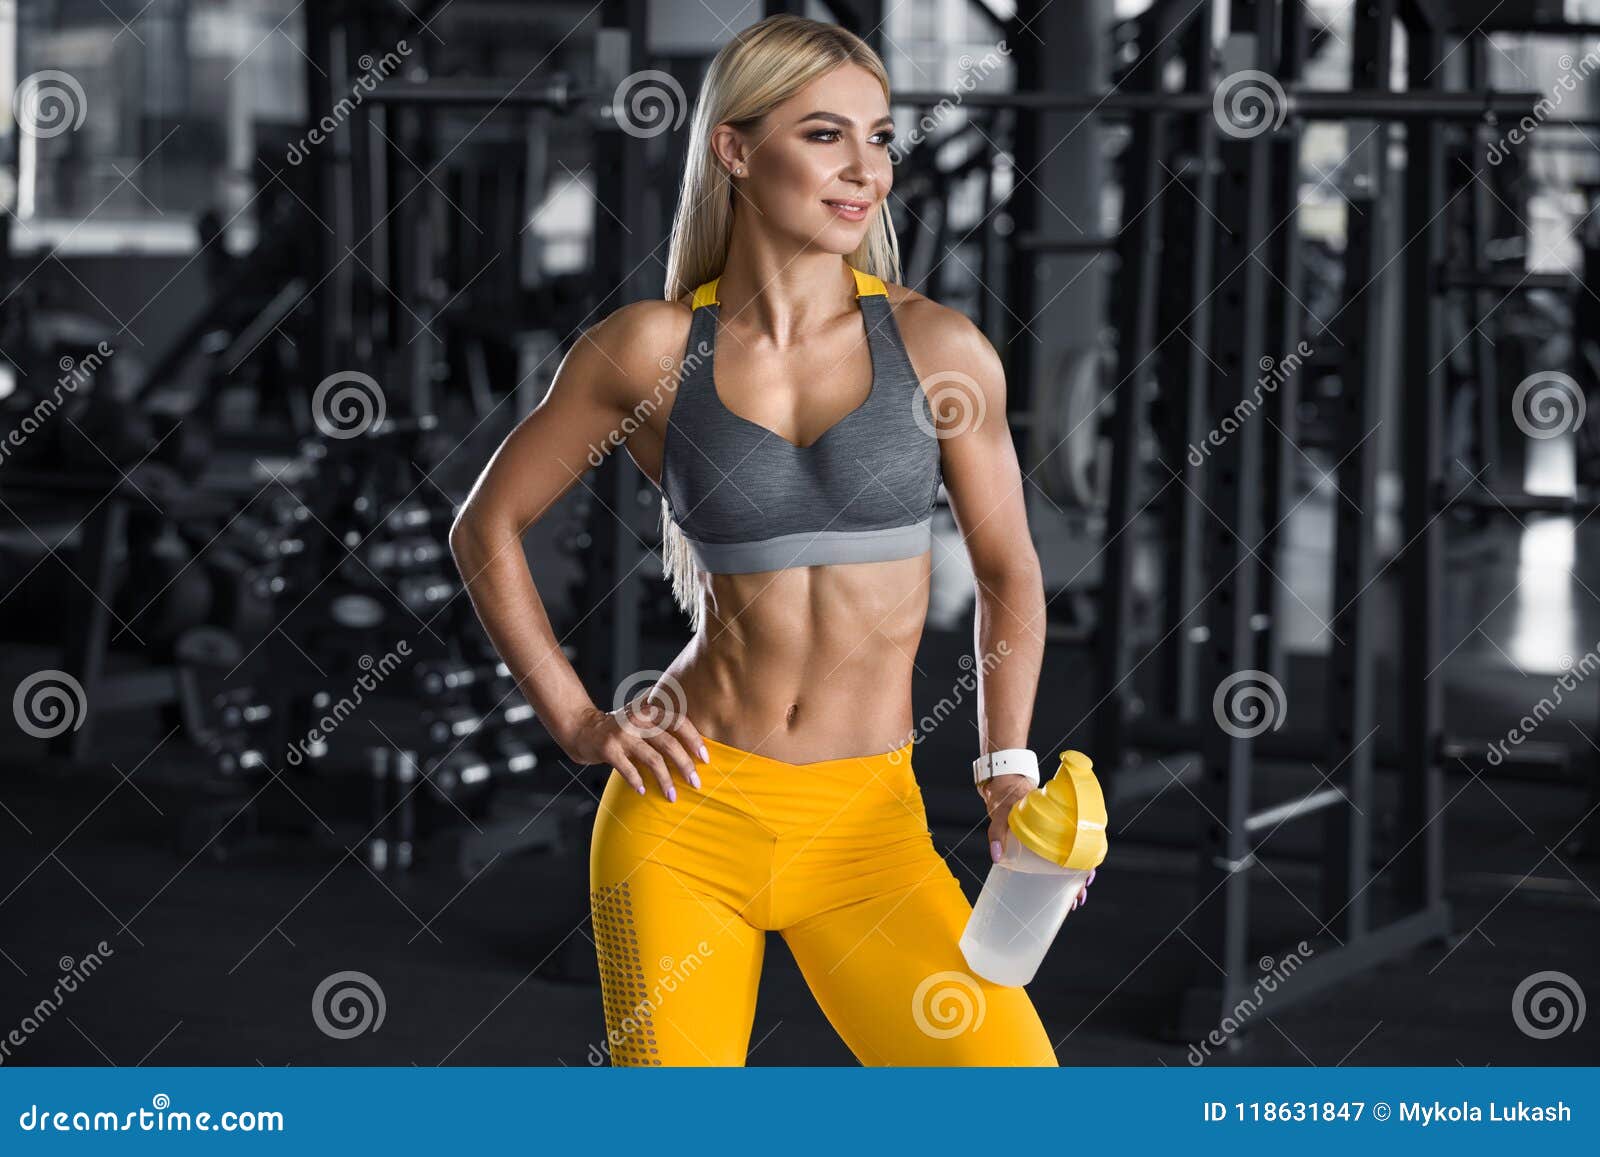 Fitness Photography Tips How to Images with Interest and Impact